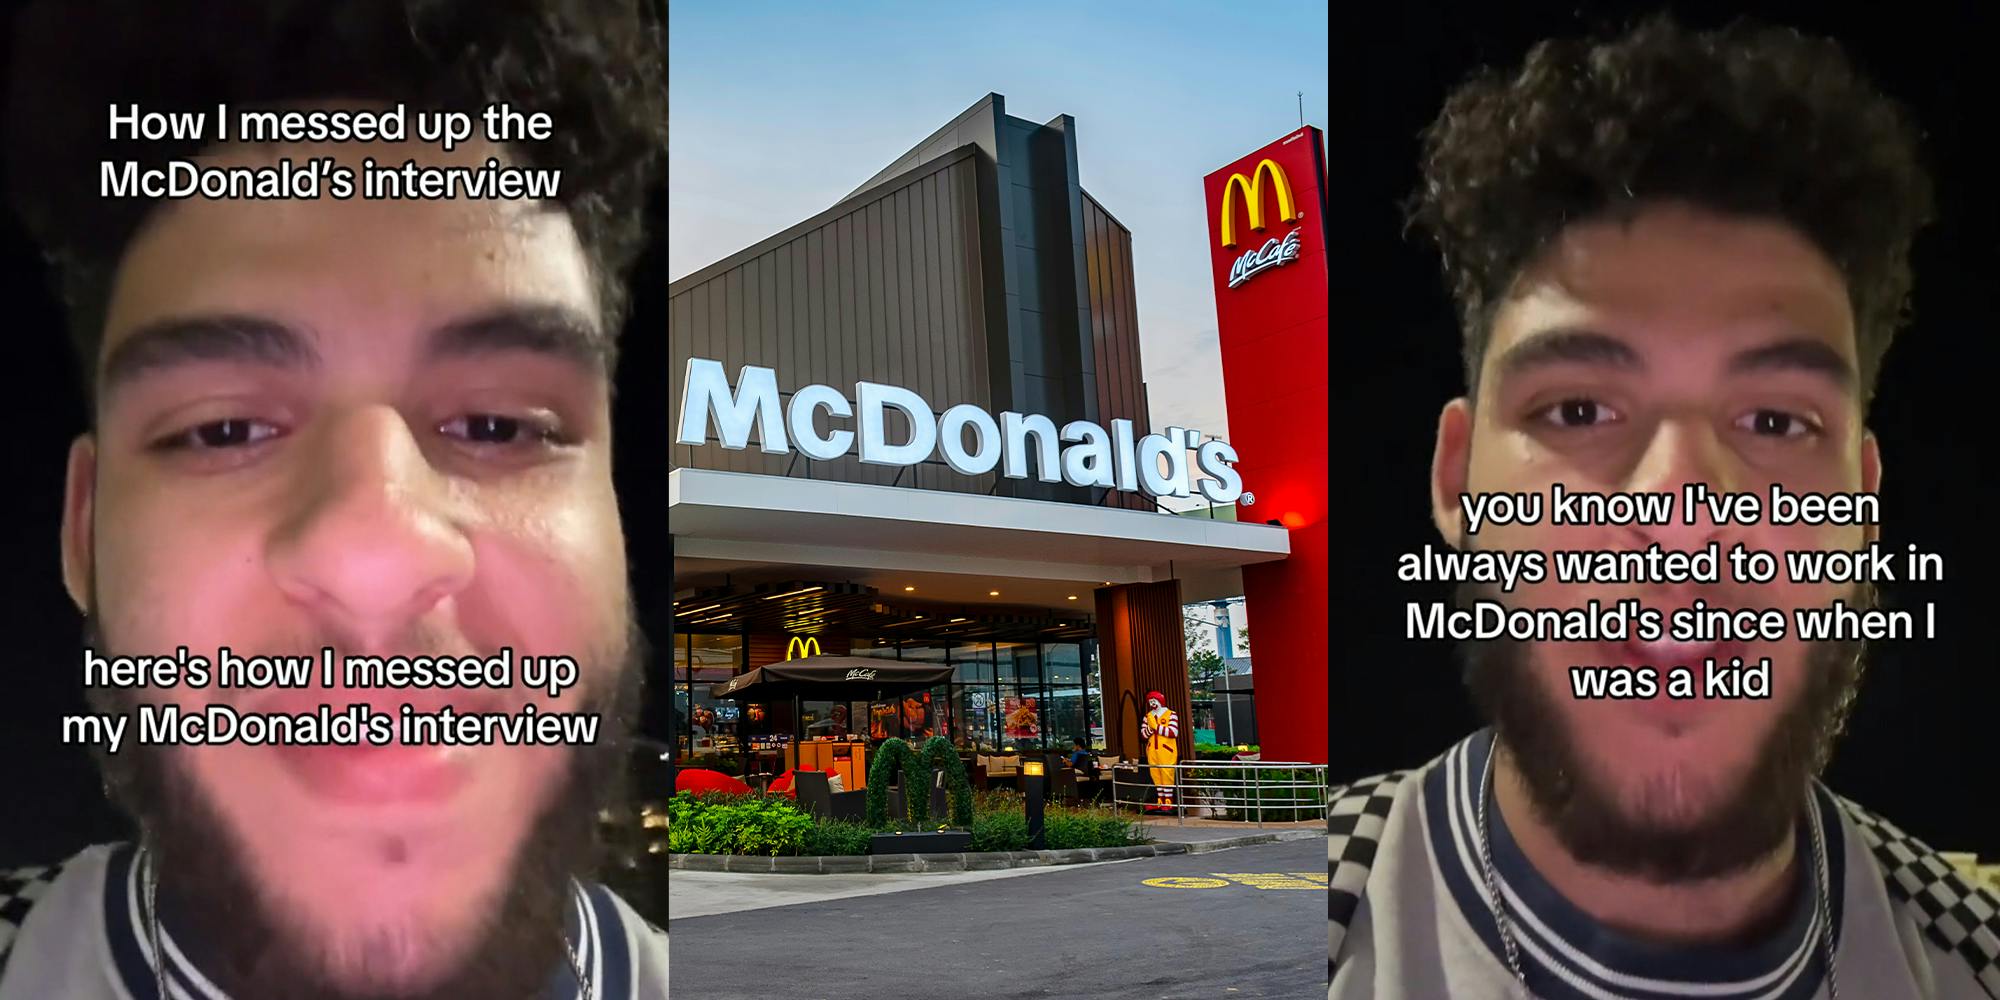 Mcdonald's interview gone awry with final question